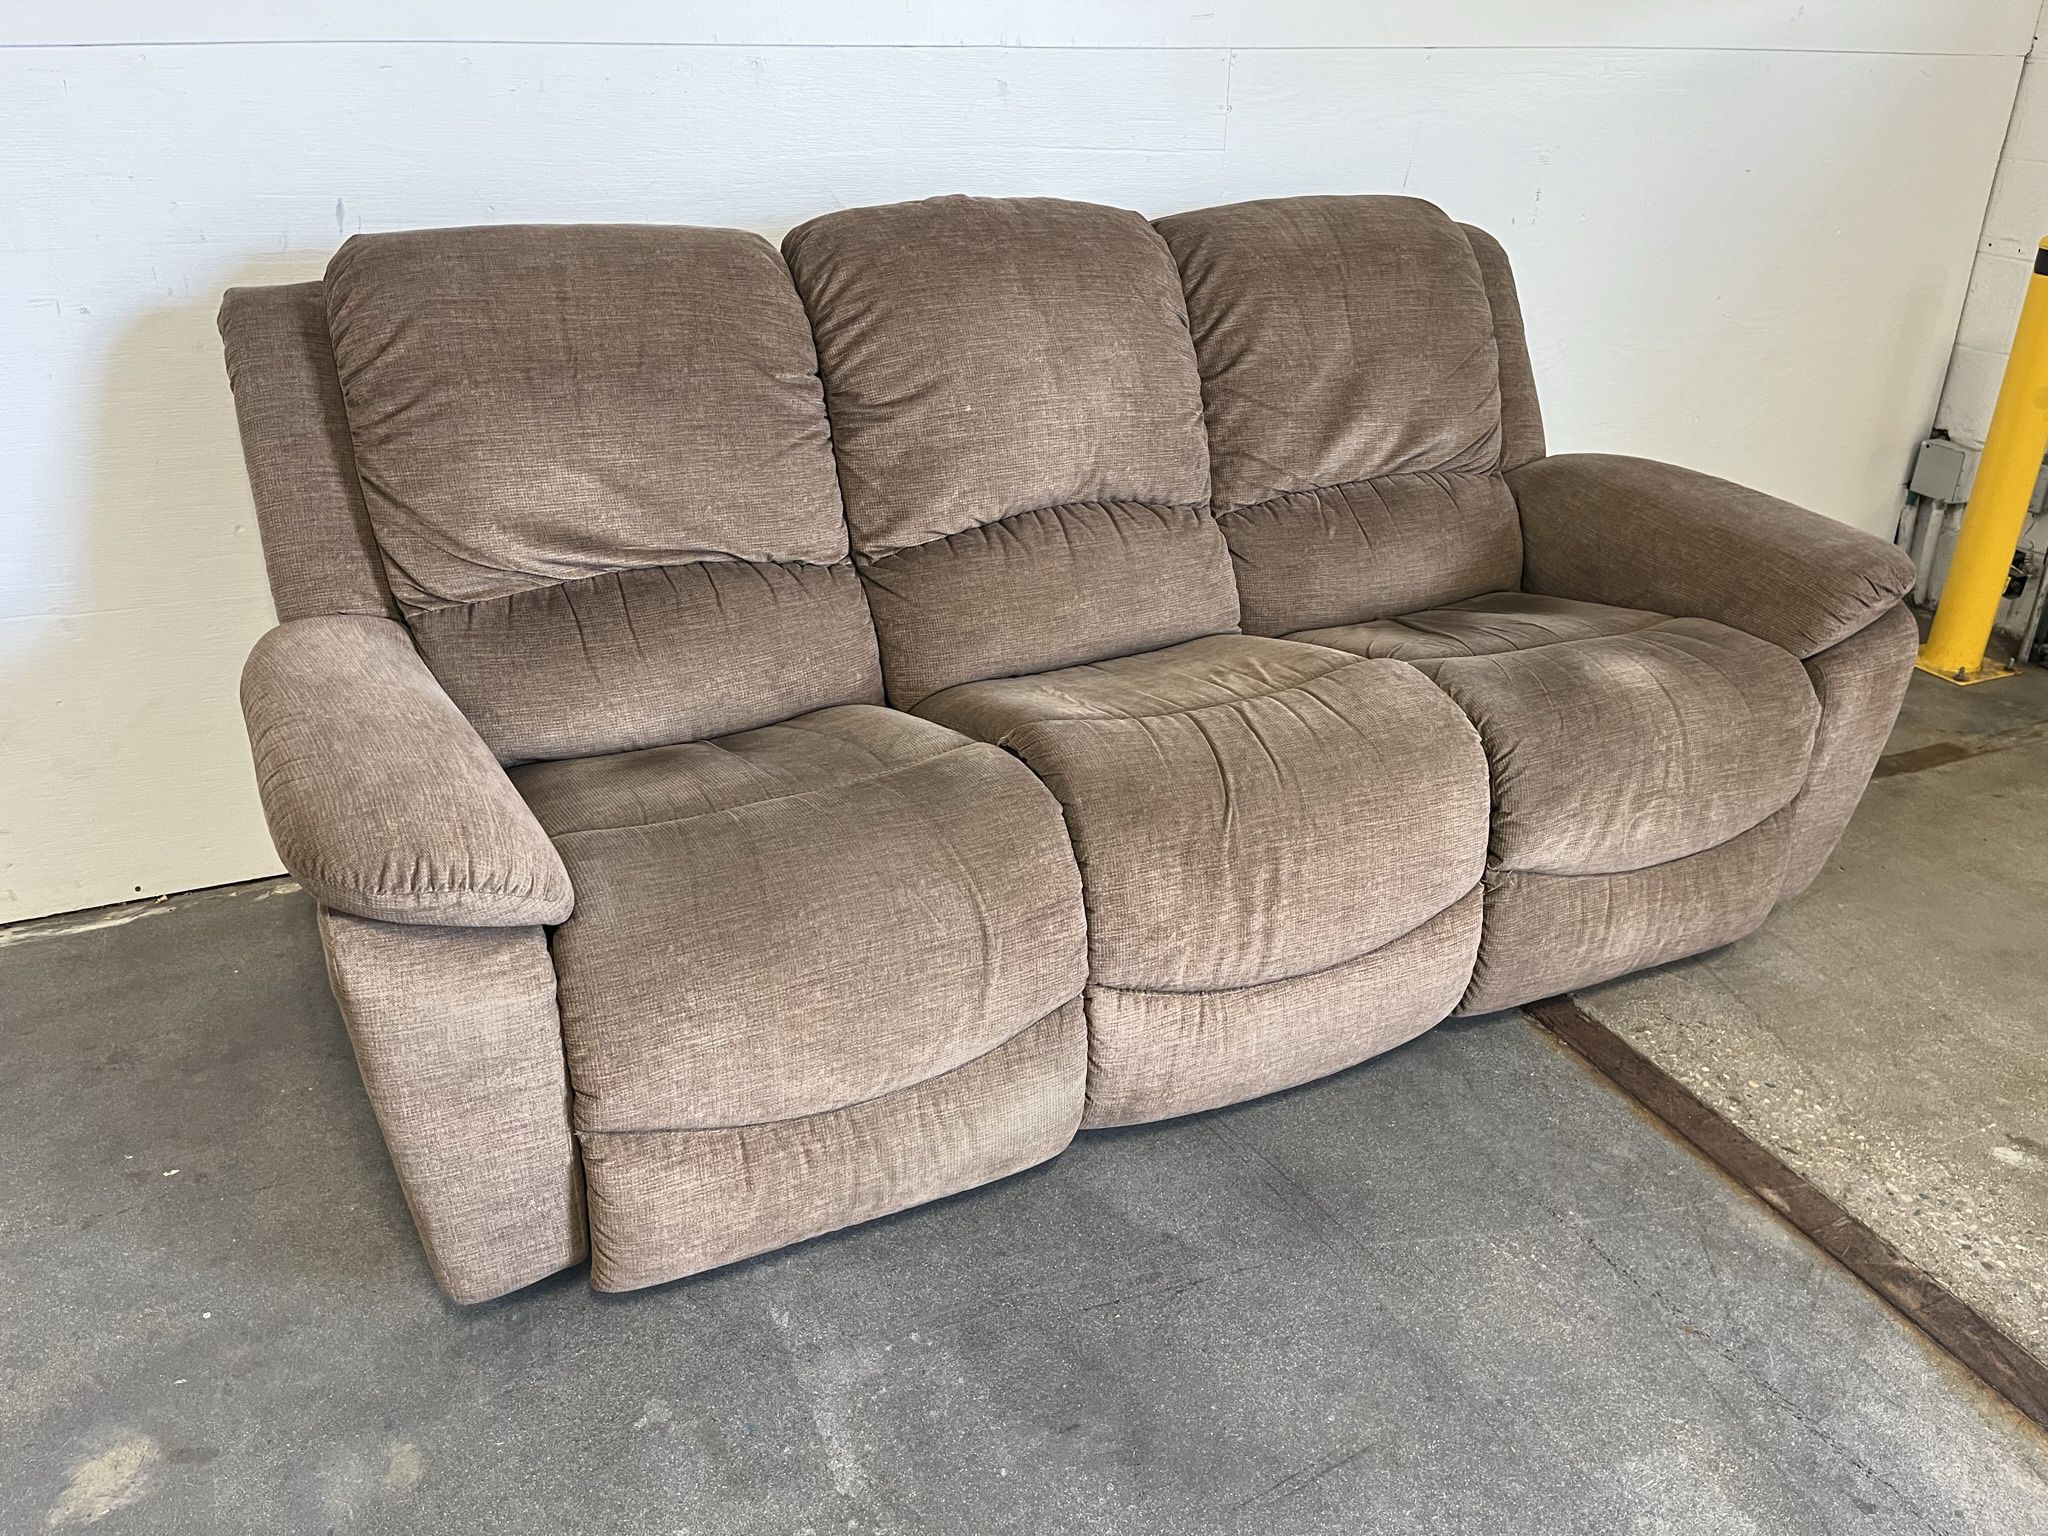 La-Z-Boy Double Recliner Sofa Couch - Electric Recliners - Comfy - Cleaned - Delivery Available 